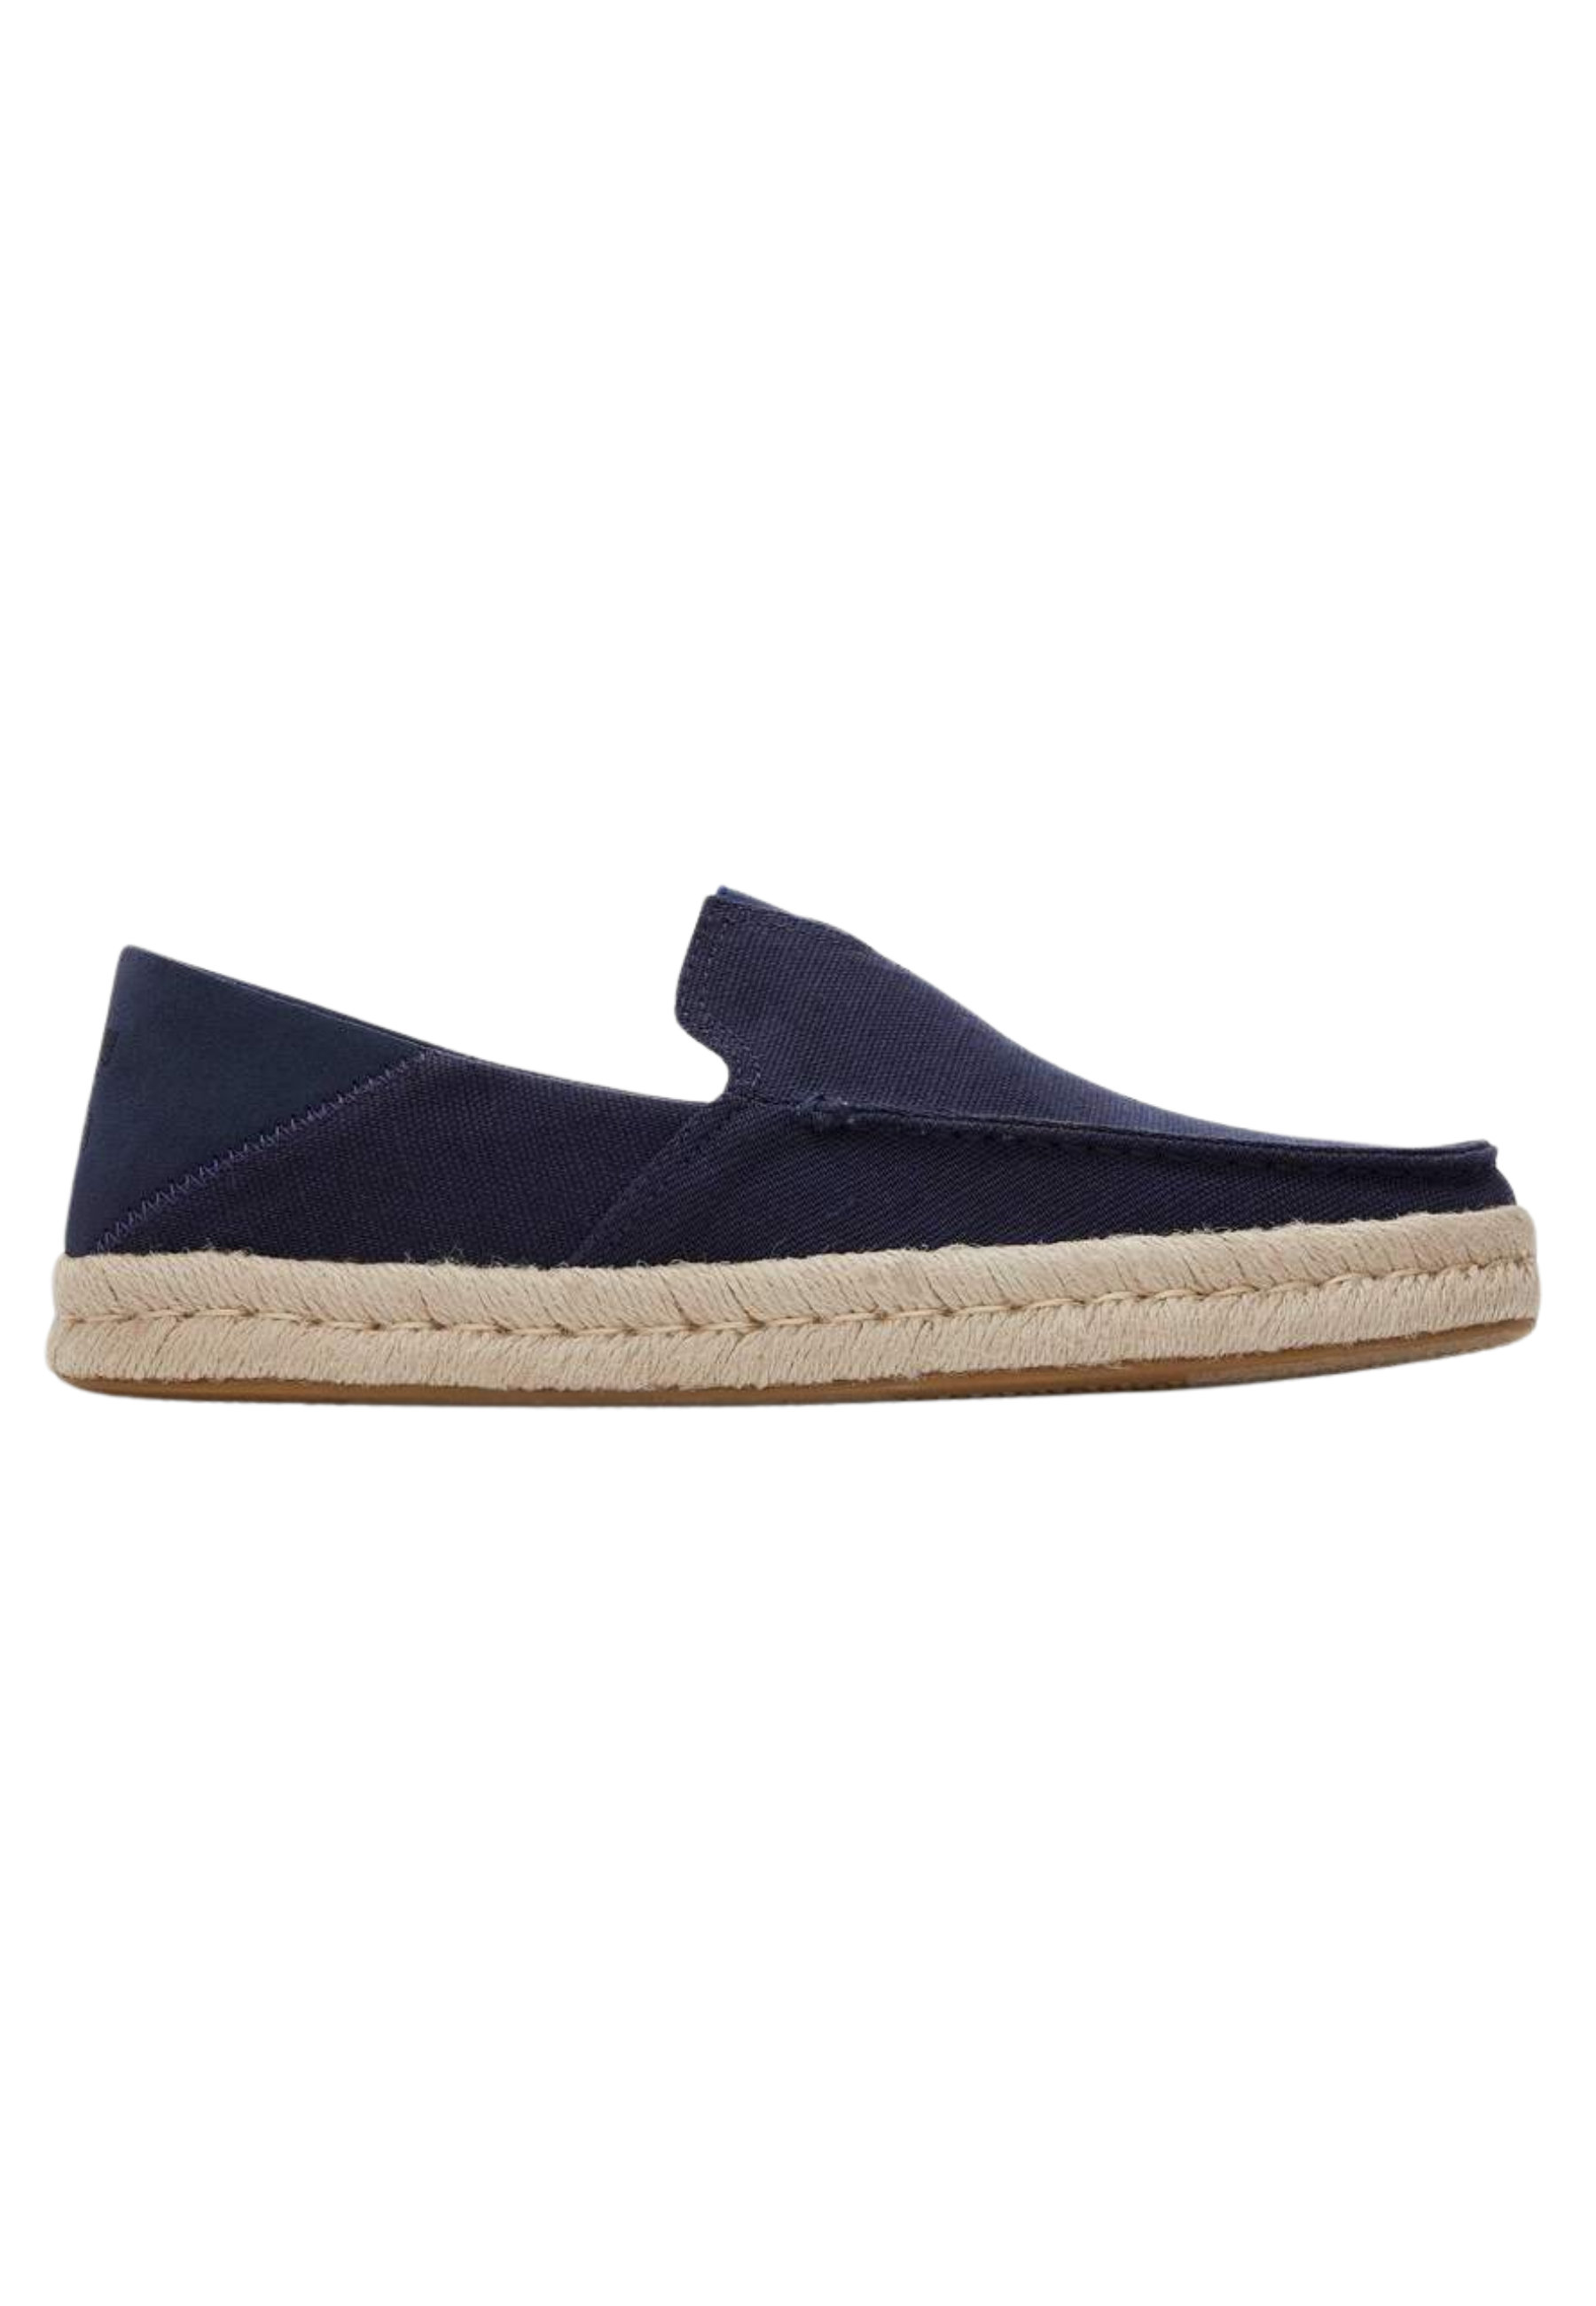 Toms Schoenen Donkerblauw Alonso loafer rope loafers donkerblauw